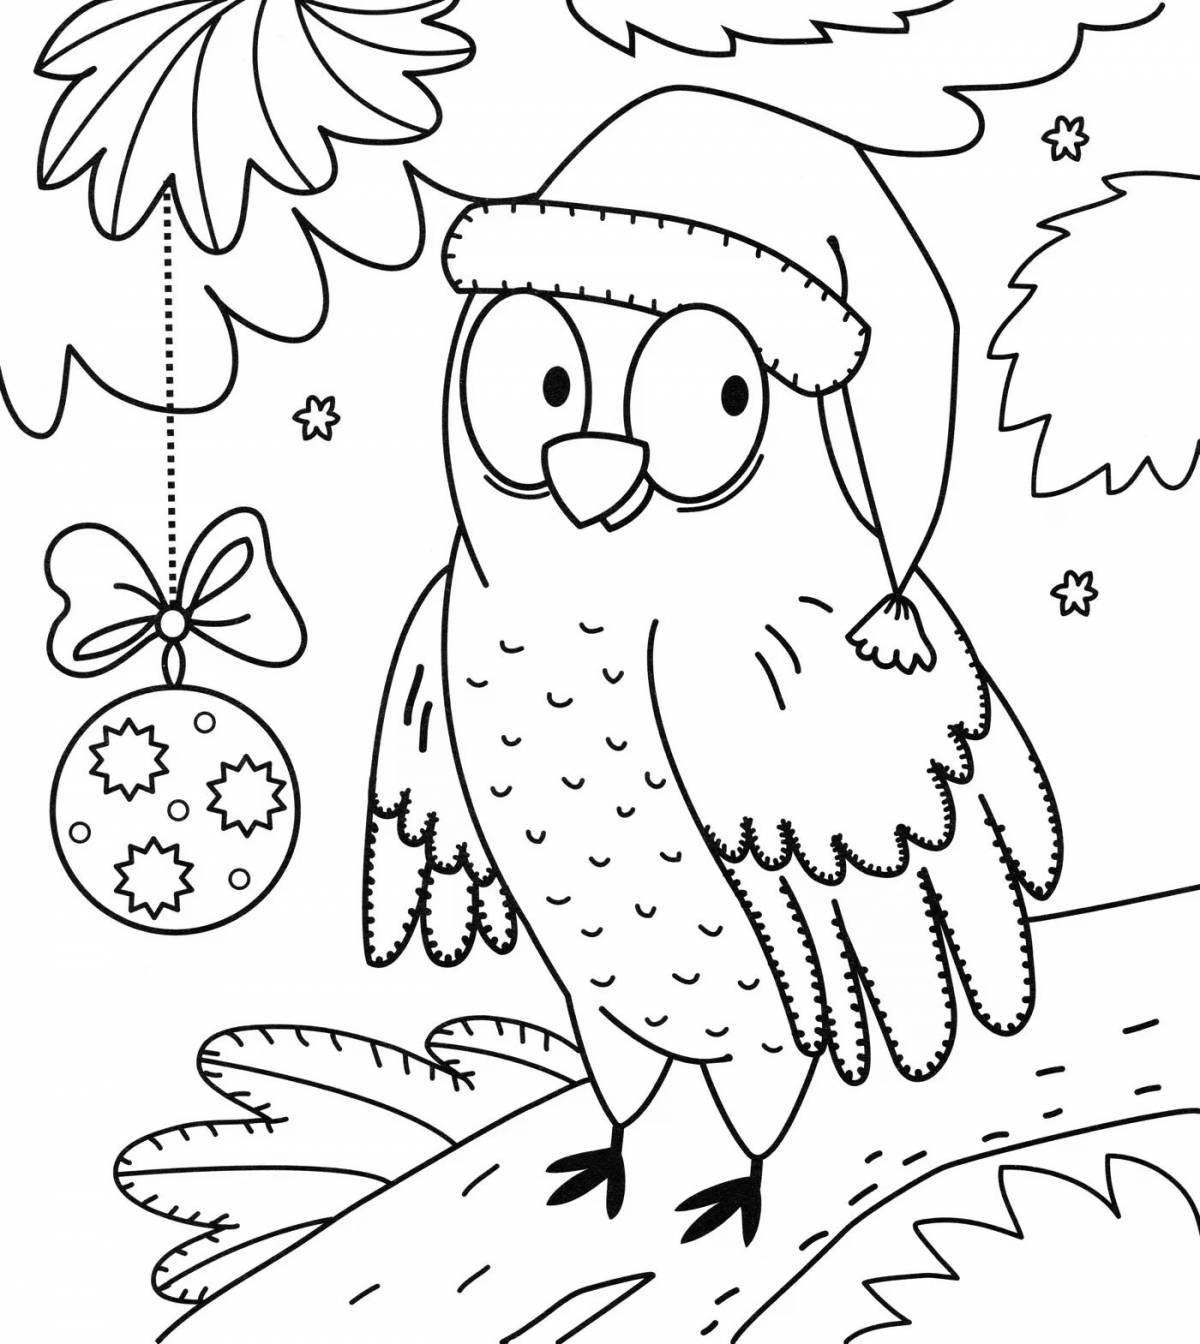 Amazing Christmas coloring book for preschoolers